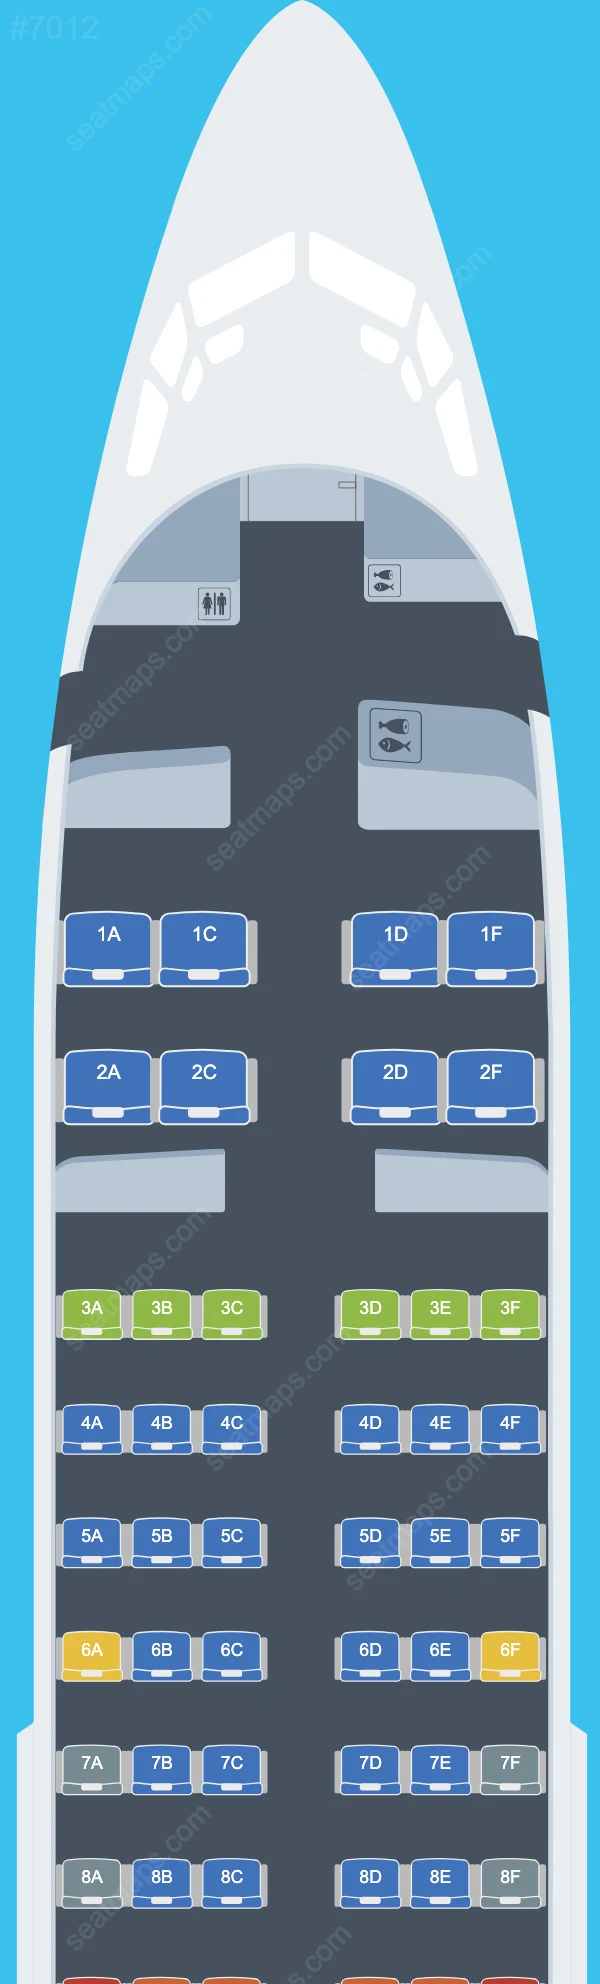 Lucky Air Boeing 737-700 V.3 seatmap preview